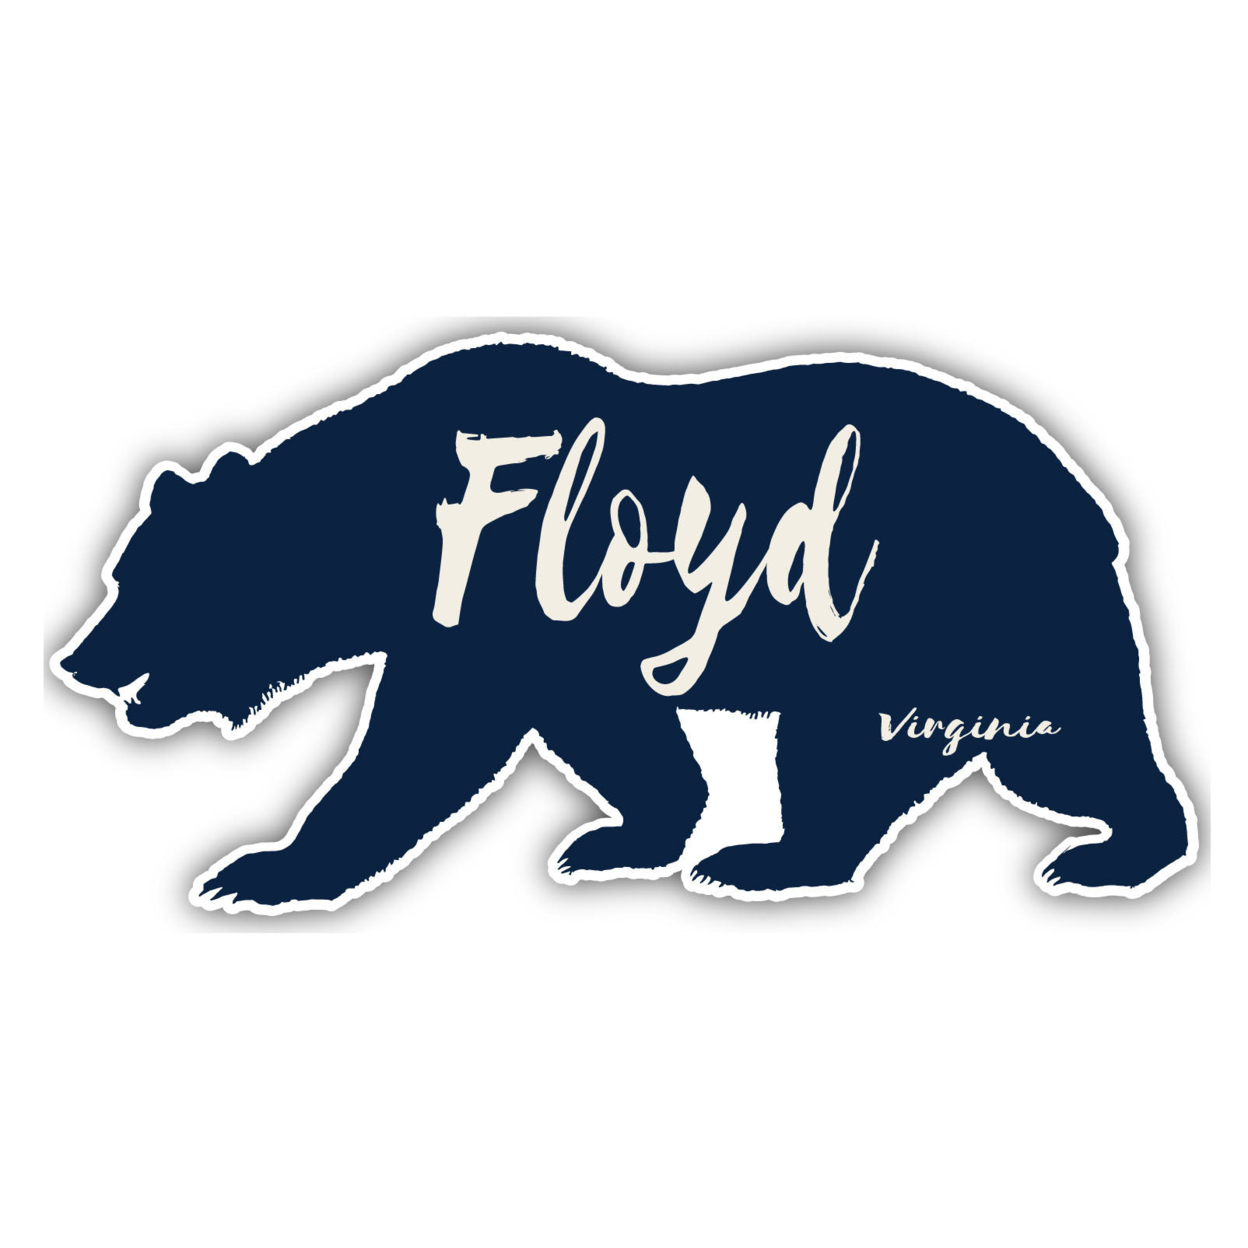 Floyd Virginia Souvenir Decorative Stickers (Choose Theme And Size) - 4-Pack, 8-Inch, Bear